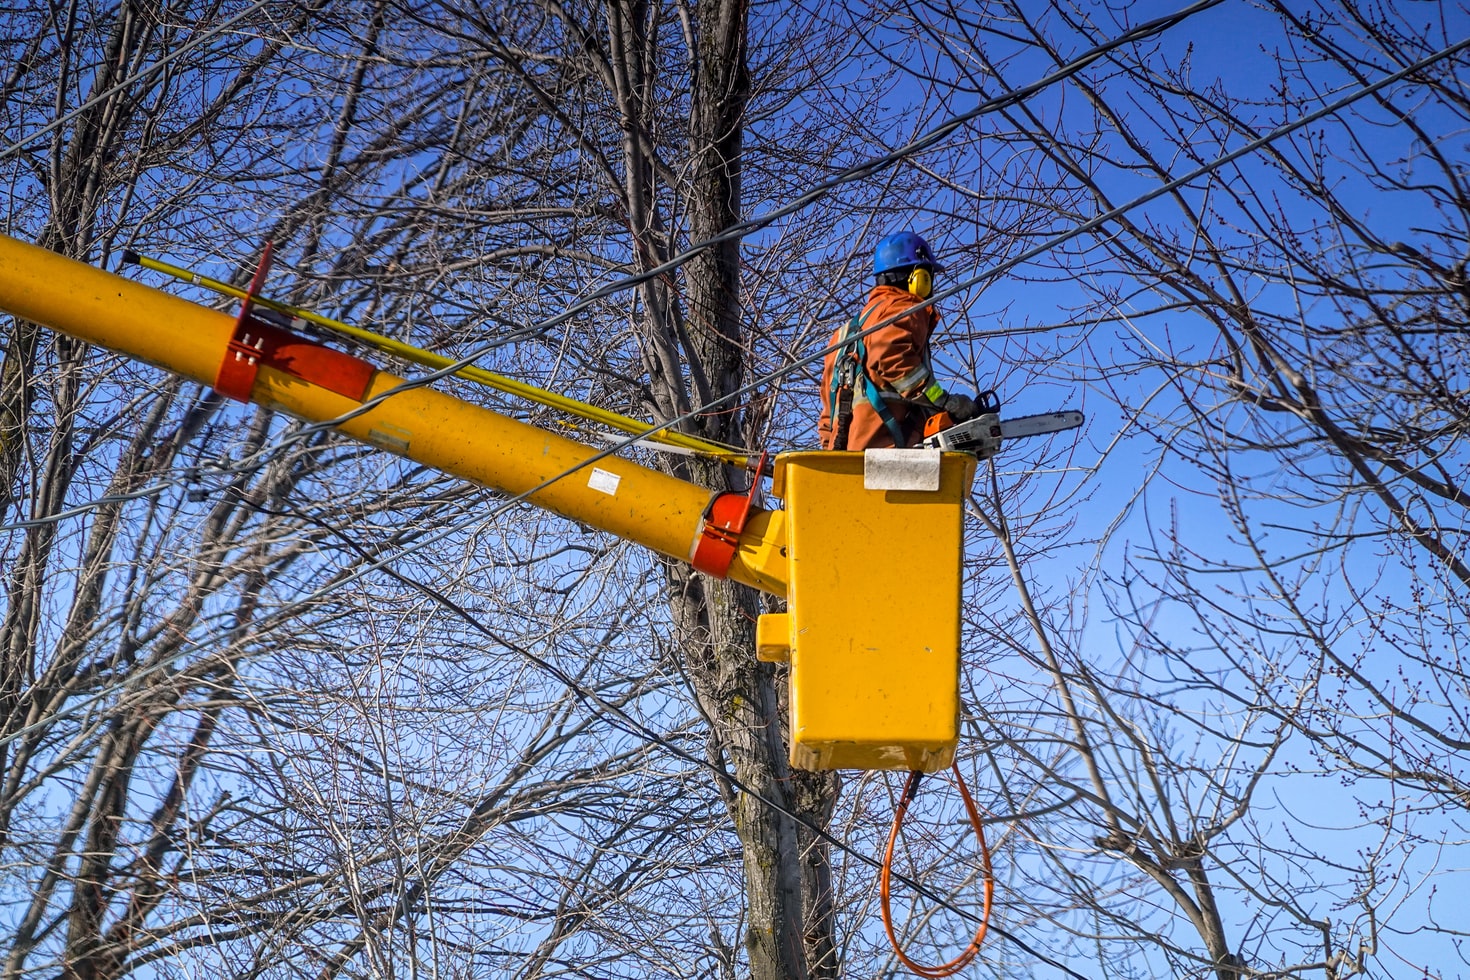 How to Offer Tree Services: A Guide for Home Improvement Business Owners